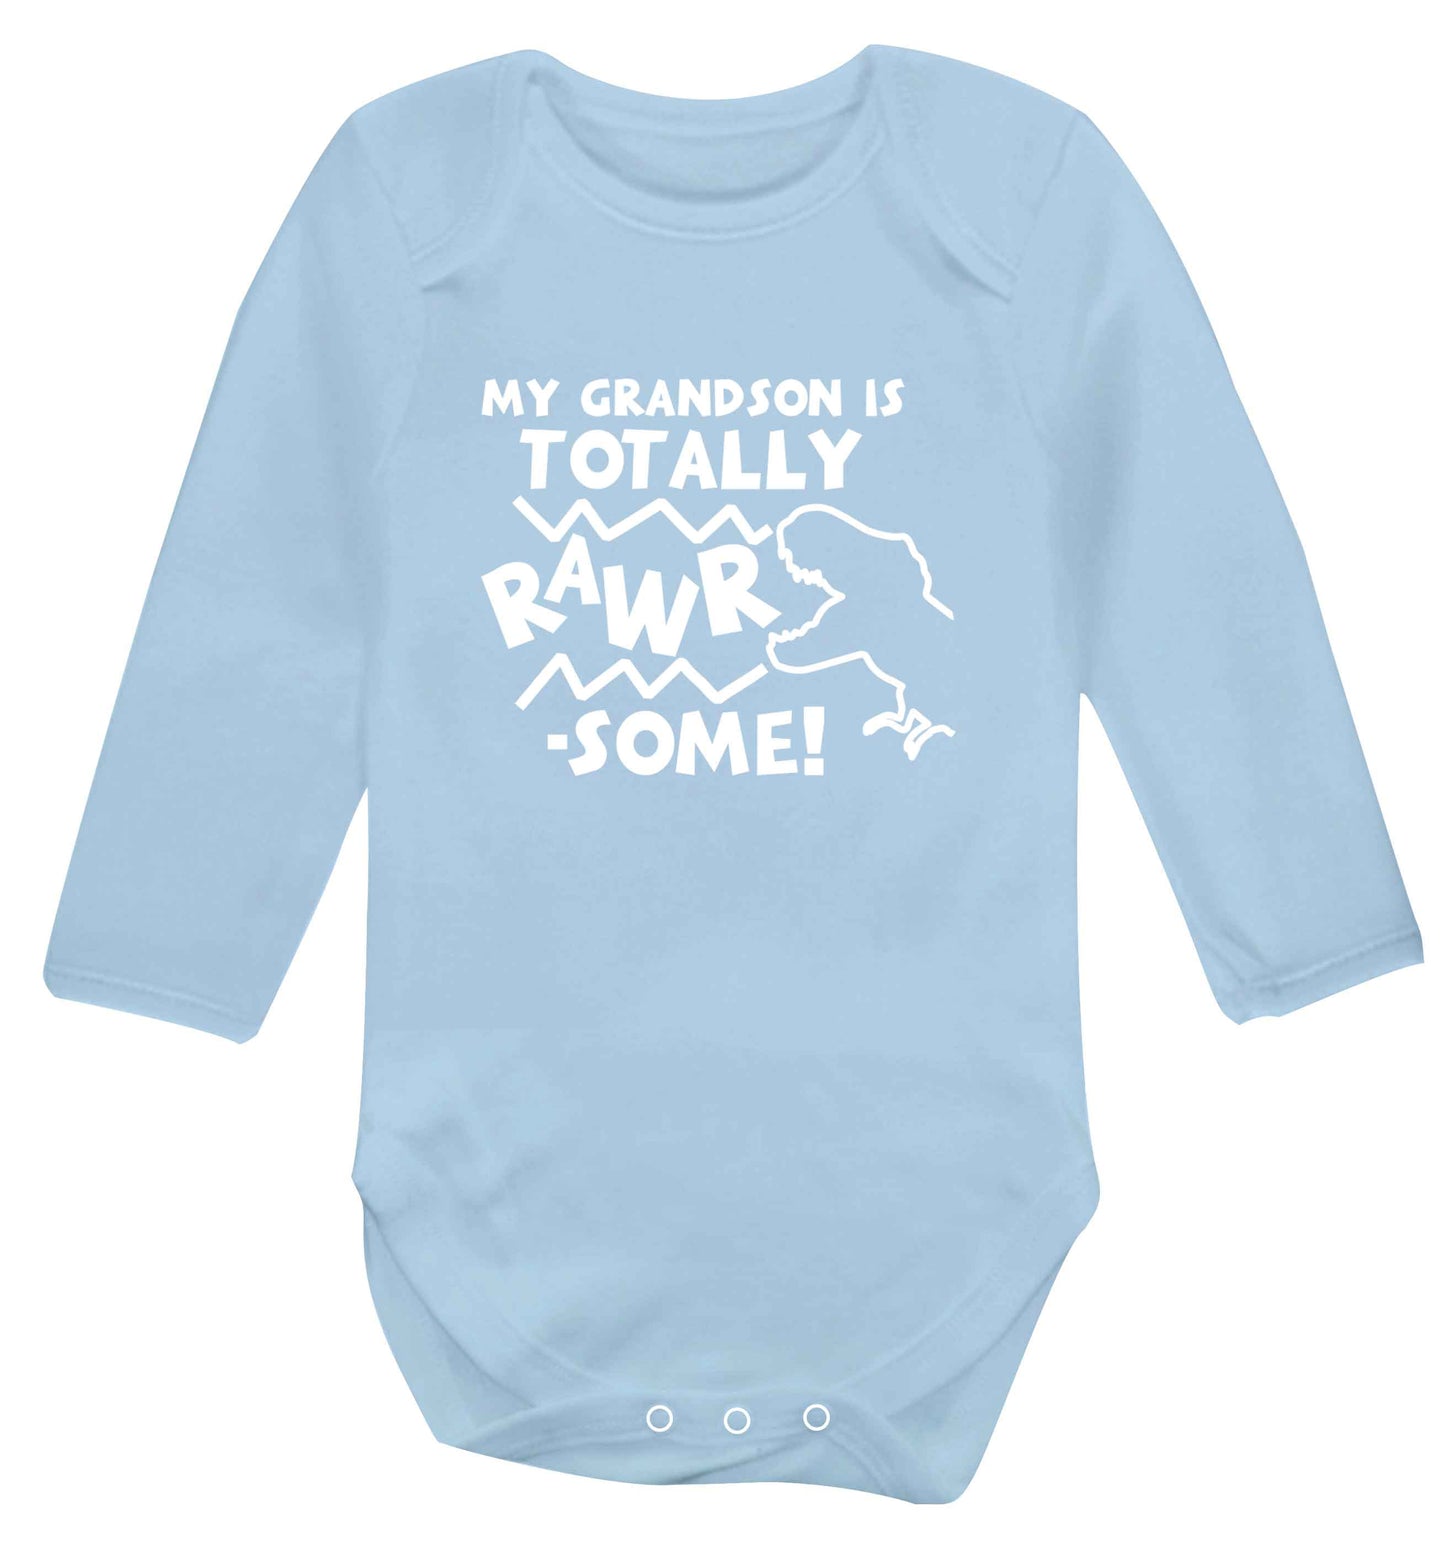 My grandson is totally rawrsome baby vest long sleeved pale blue 6-12 months